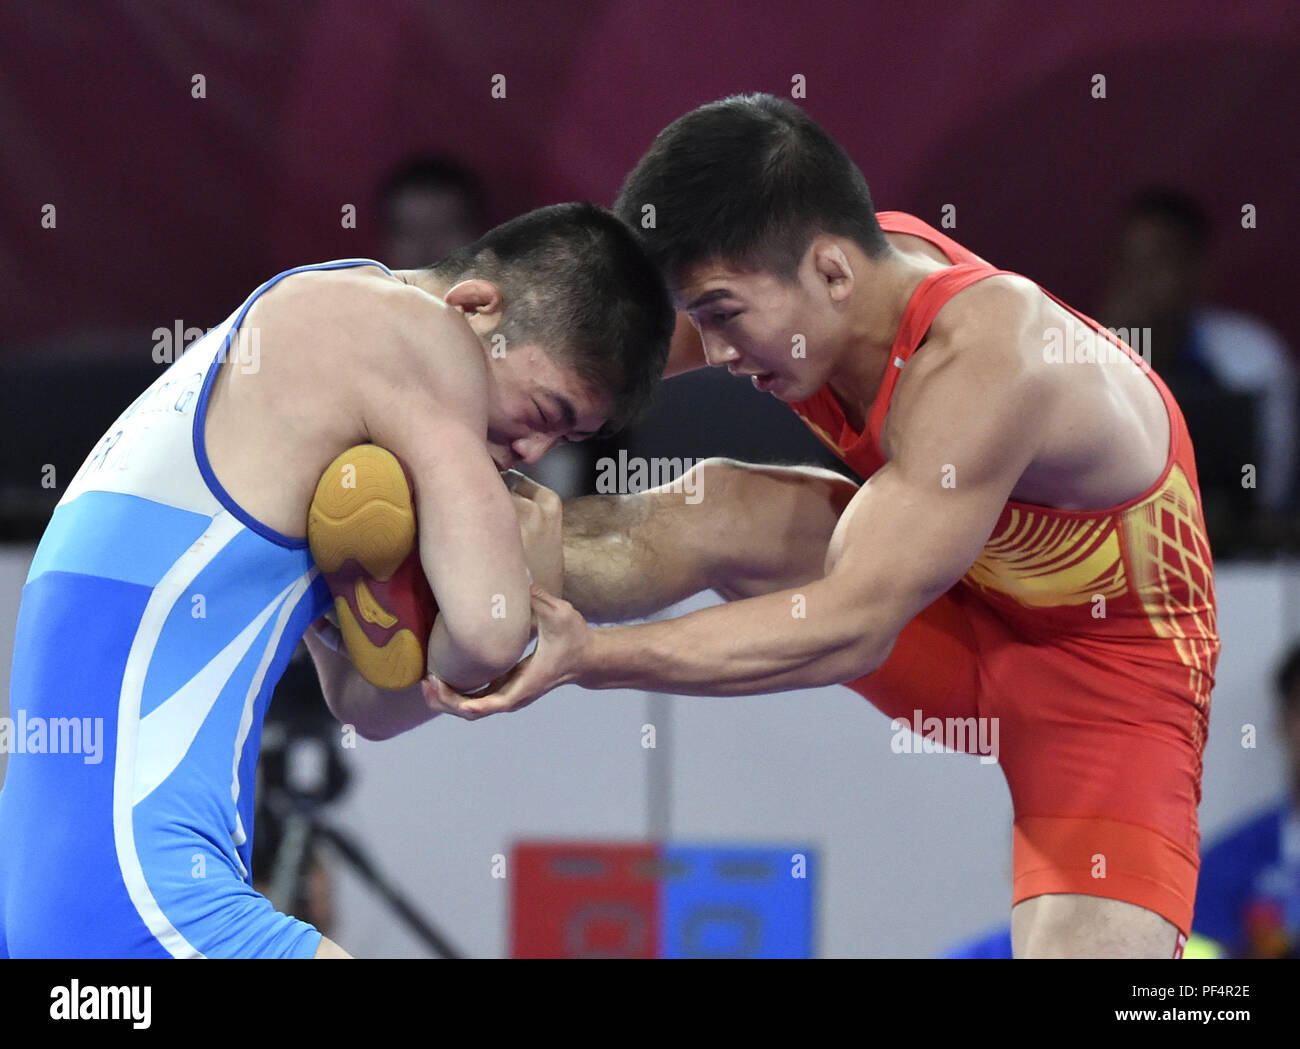 Jakarta, Indonesia. 19th Aug, 2018. Liu Minghu (R) of China competes during the Men's Freestyle 57kg Semifinals with Kang Kum Song of the Democratic People's Republic of Korea (DPRK) at the 18th Asian Games in Jakarta, Indonesia, Aug. 19, 2018. Credit: Li He/Xinhua/Alamy Live News Stock Photo